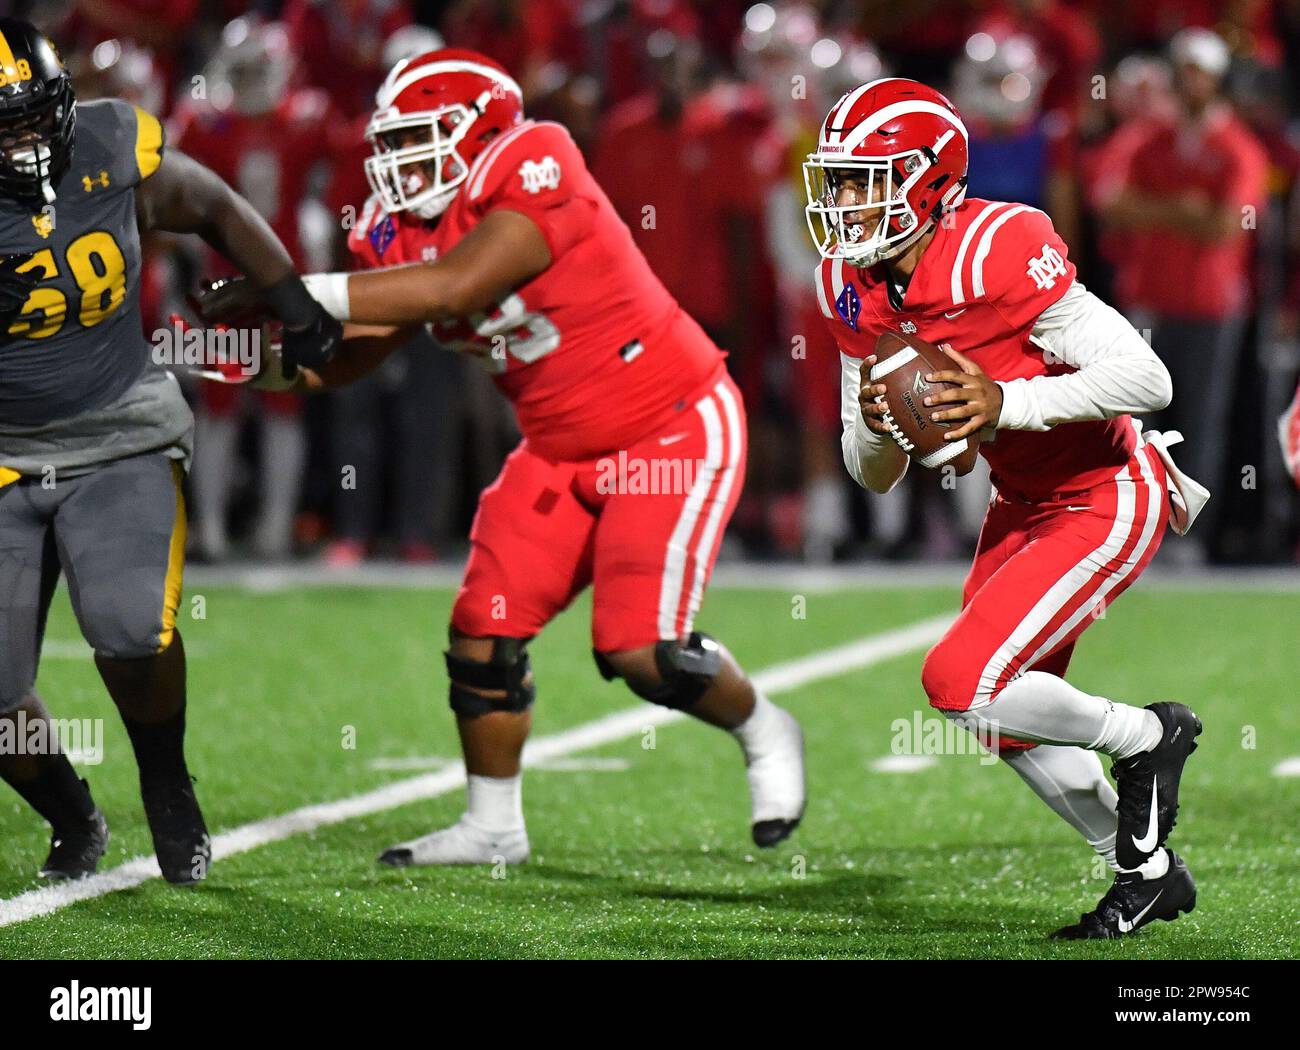 September 14, 2019 Bellflower, CA.Top Prep Quarterback prospect Bryce Young #9 of Mater Dei in action vs. St. Francis Academy Panthers of Maryland.Mater Dei Monarchs vs.St. Francis Academy Panthers of Maryland.Trinity League vs. the USA Showcase.St. Francis Academy Panthers vs. Mater Dei Monarchs in Bellflower, California.Louis Lopez/Modern Exposure/Cal Sport Media. Stock Photo